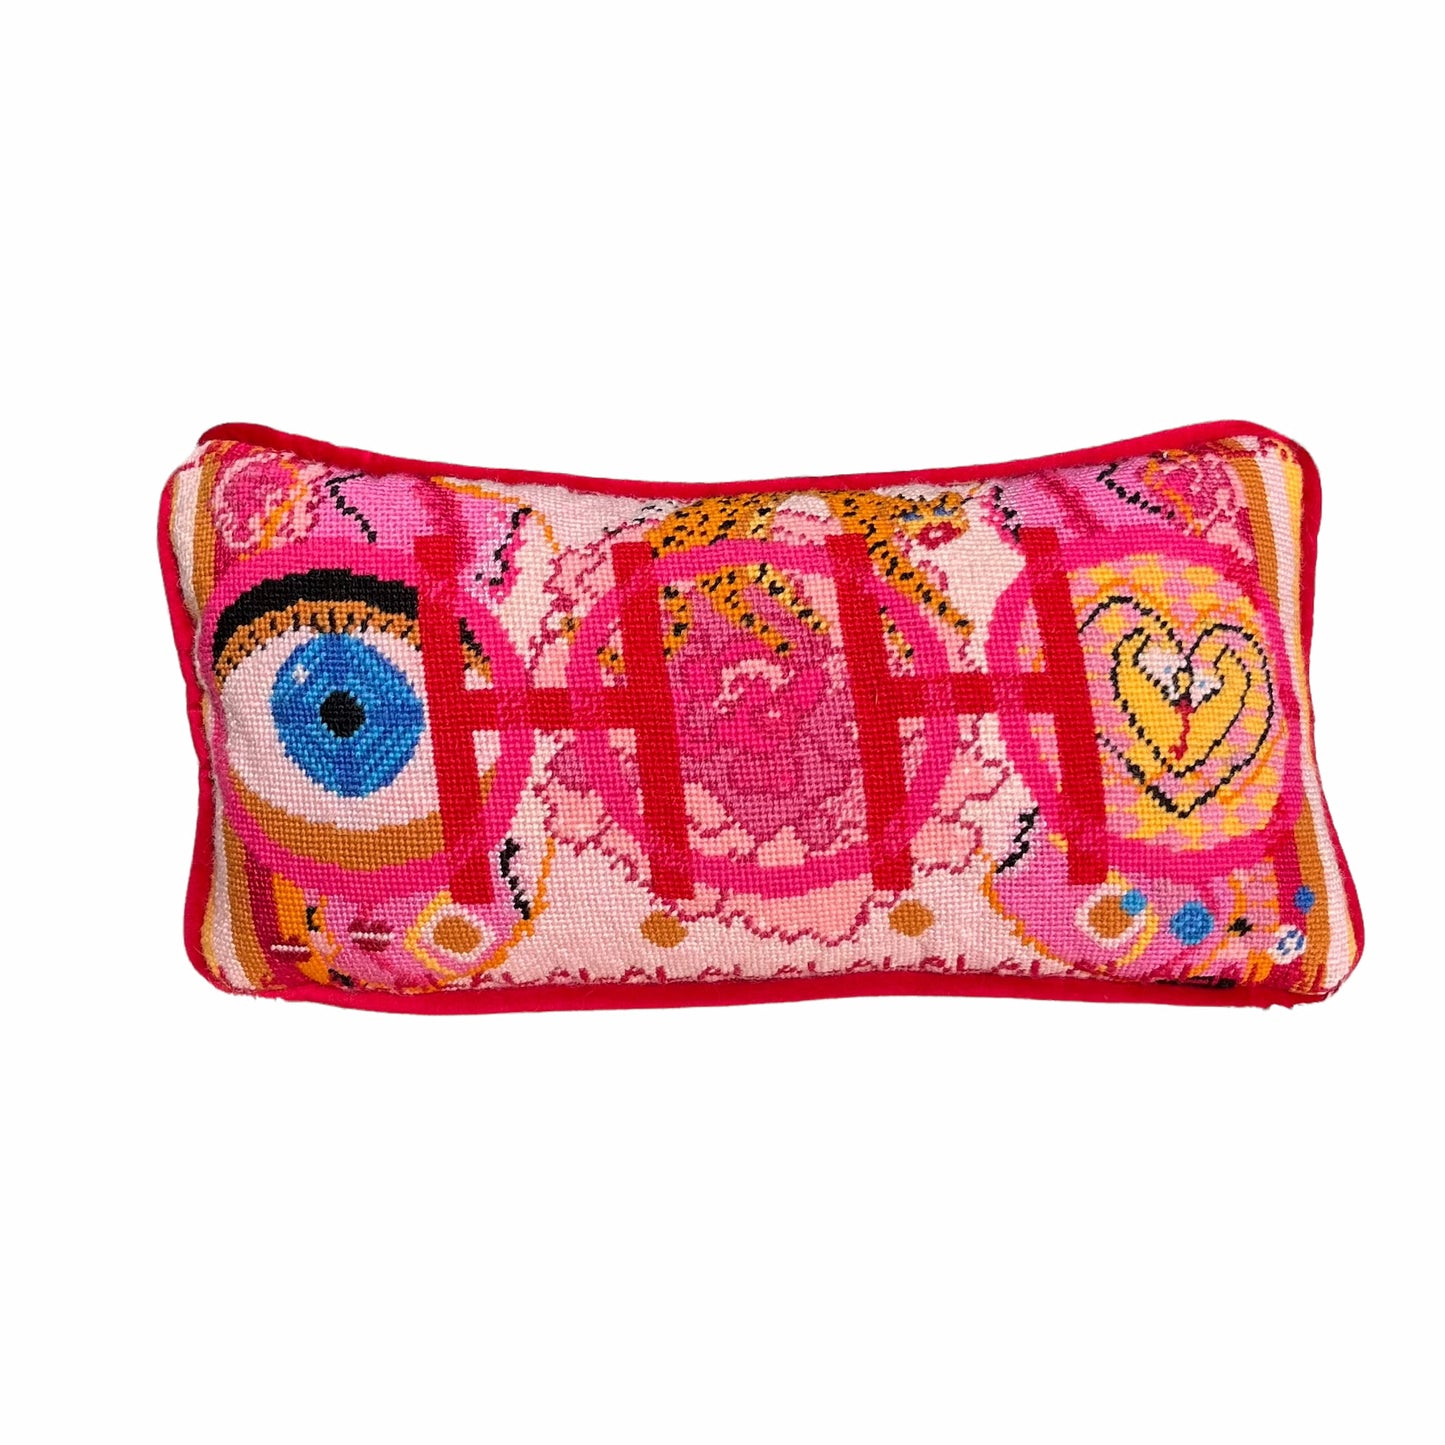 needlepoint pillow with pink and red colorful pattern, blue eye, cheetah, heart snakes, roses and lettering OOH in center with a LA LA LA border